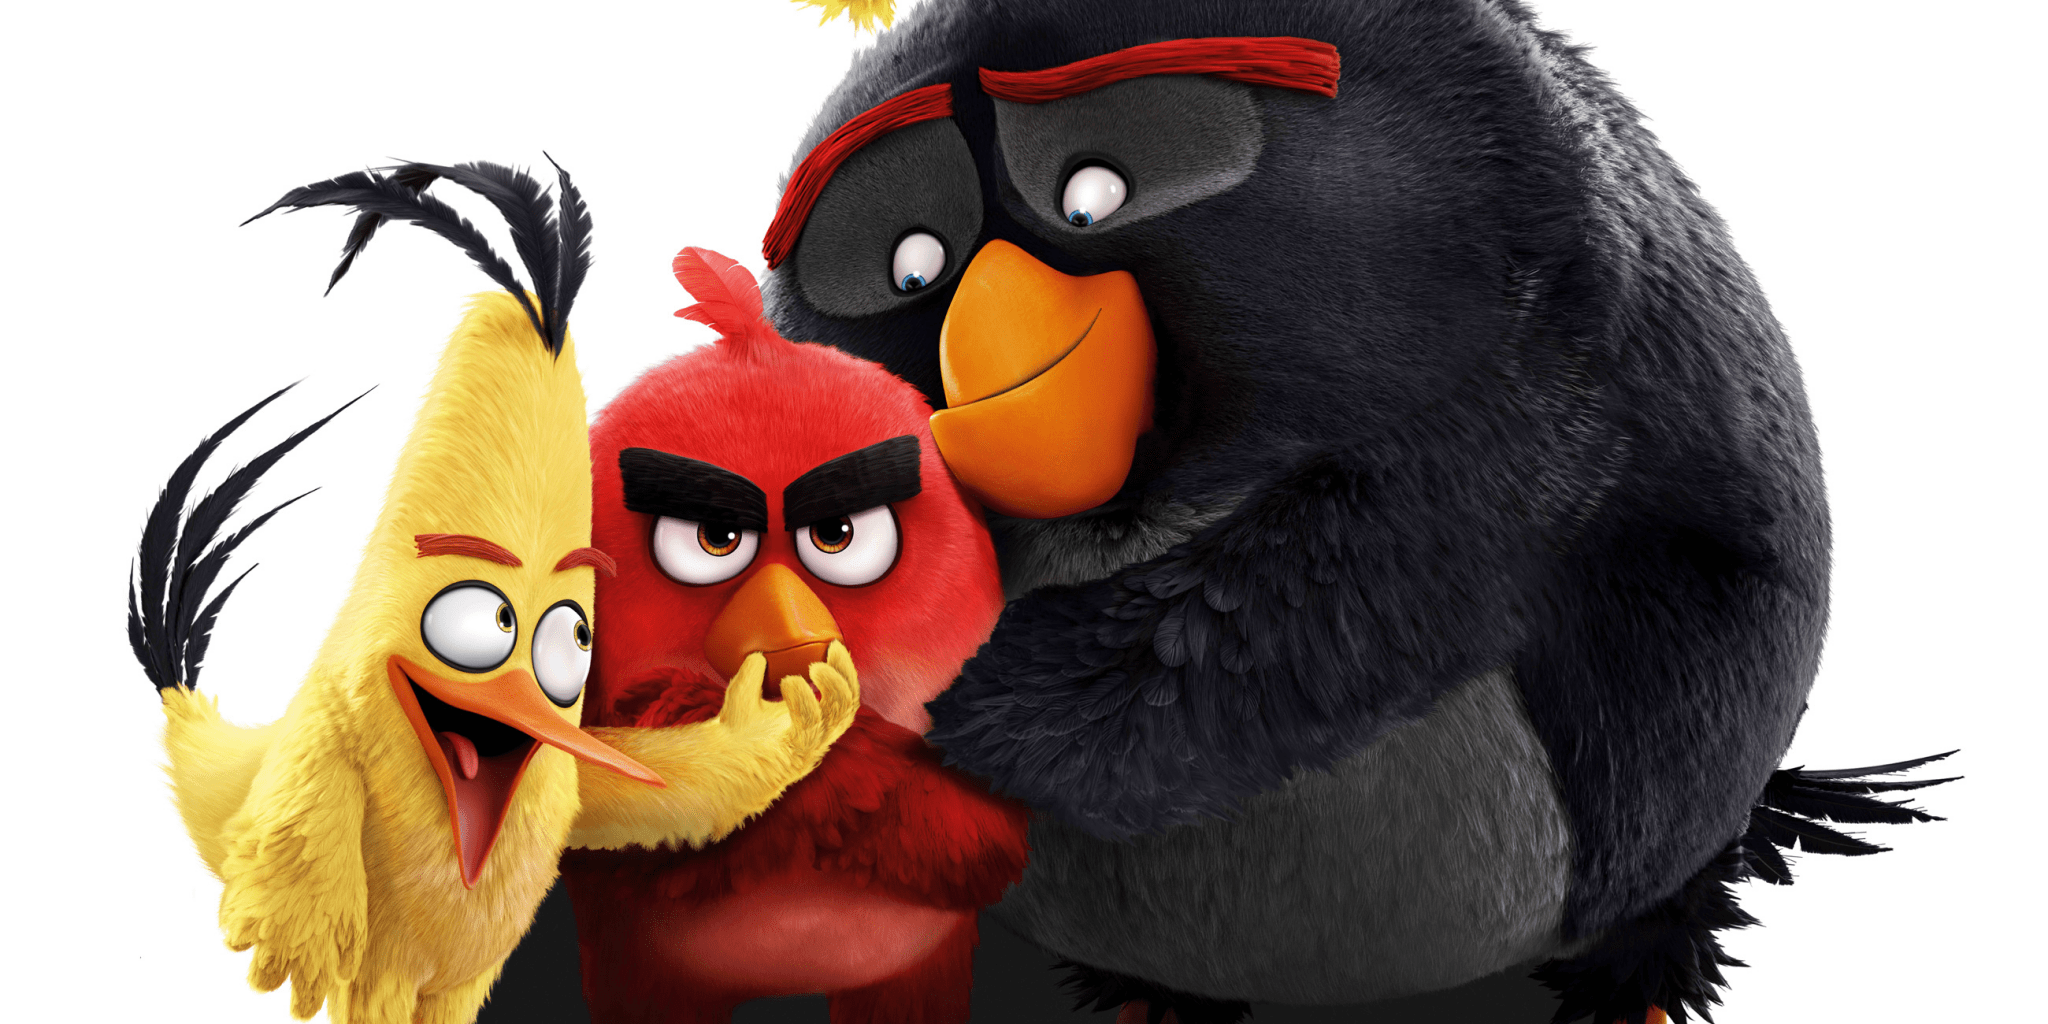 New trailer for 'The Angry Birds Movie 2' welcomes you back to bird